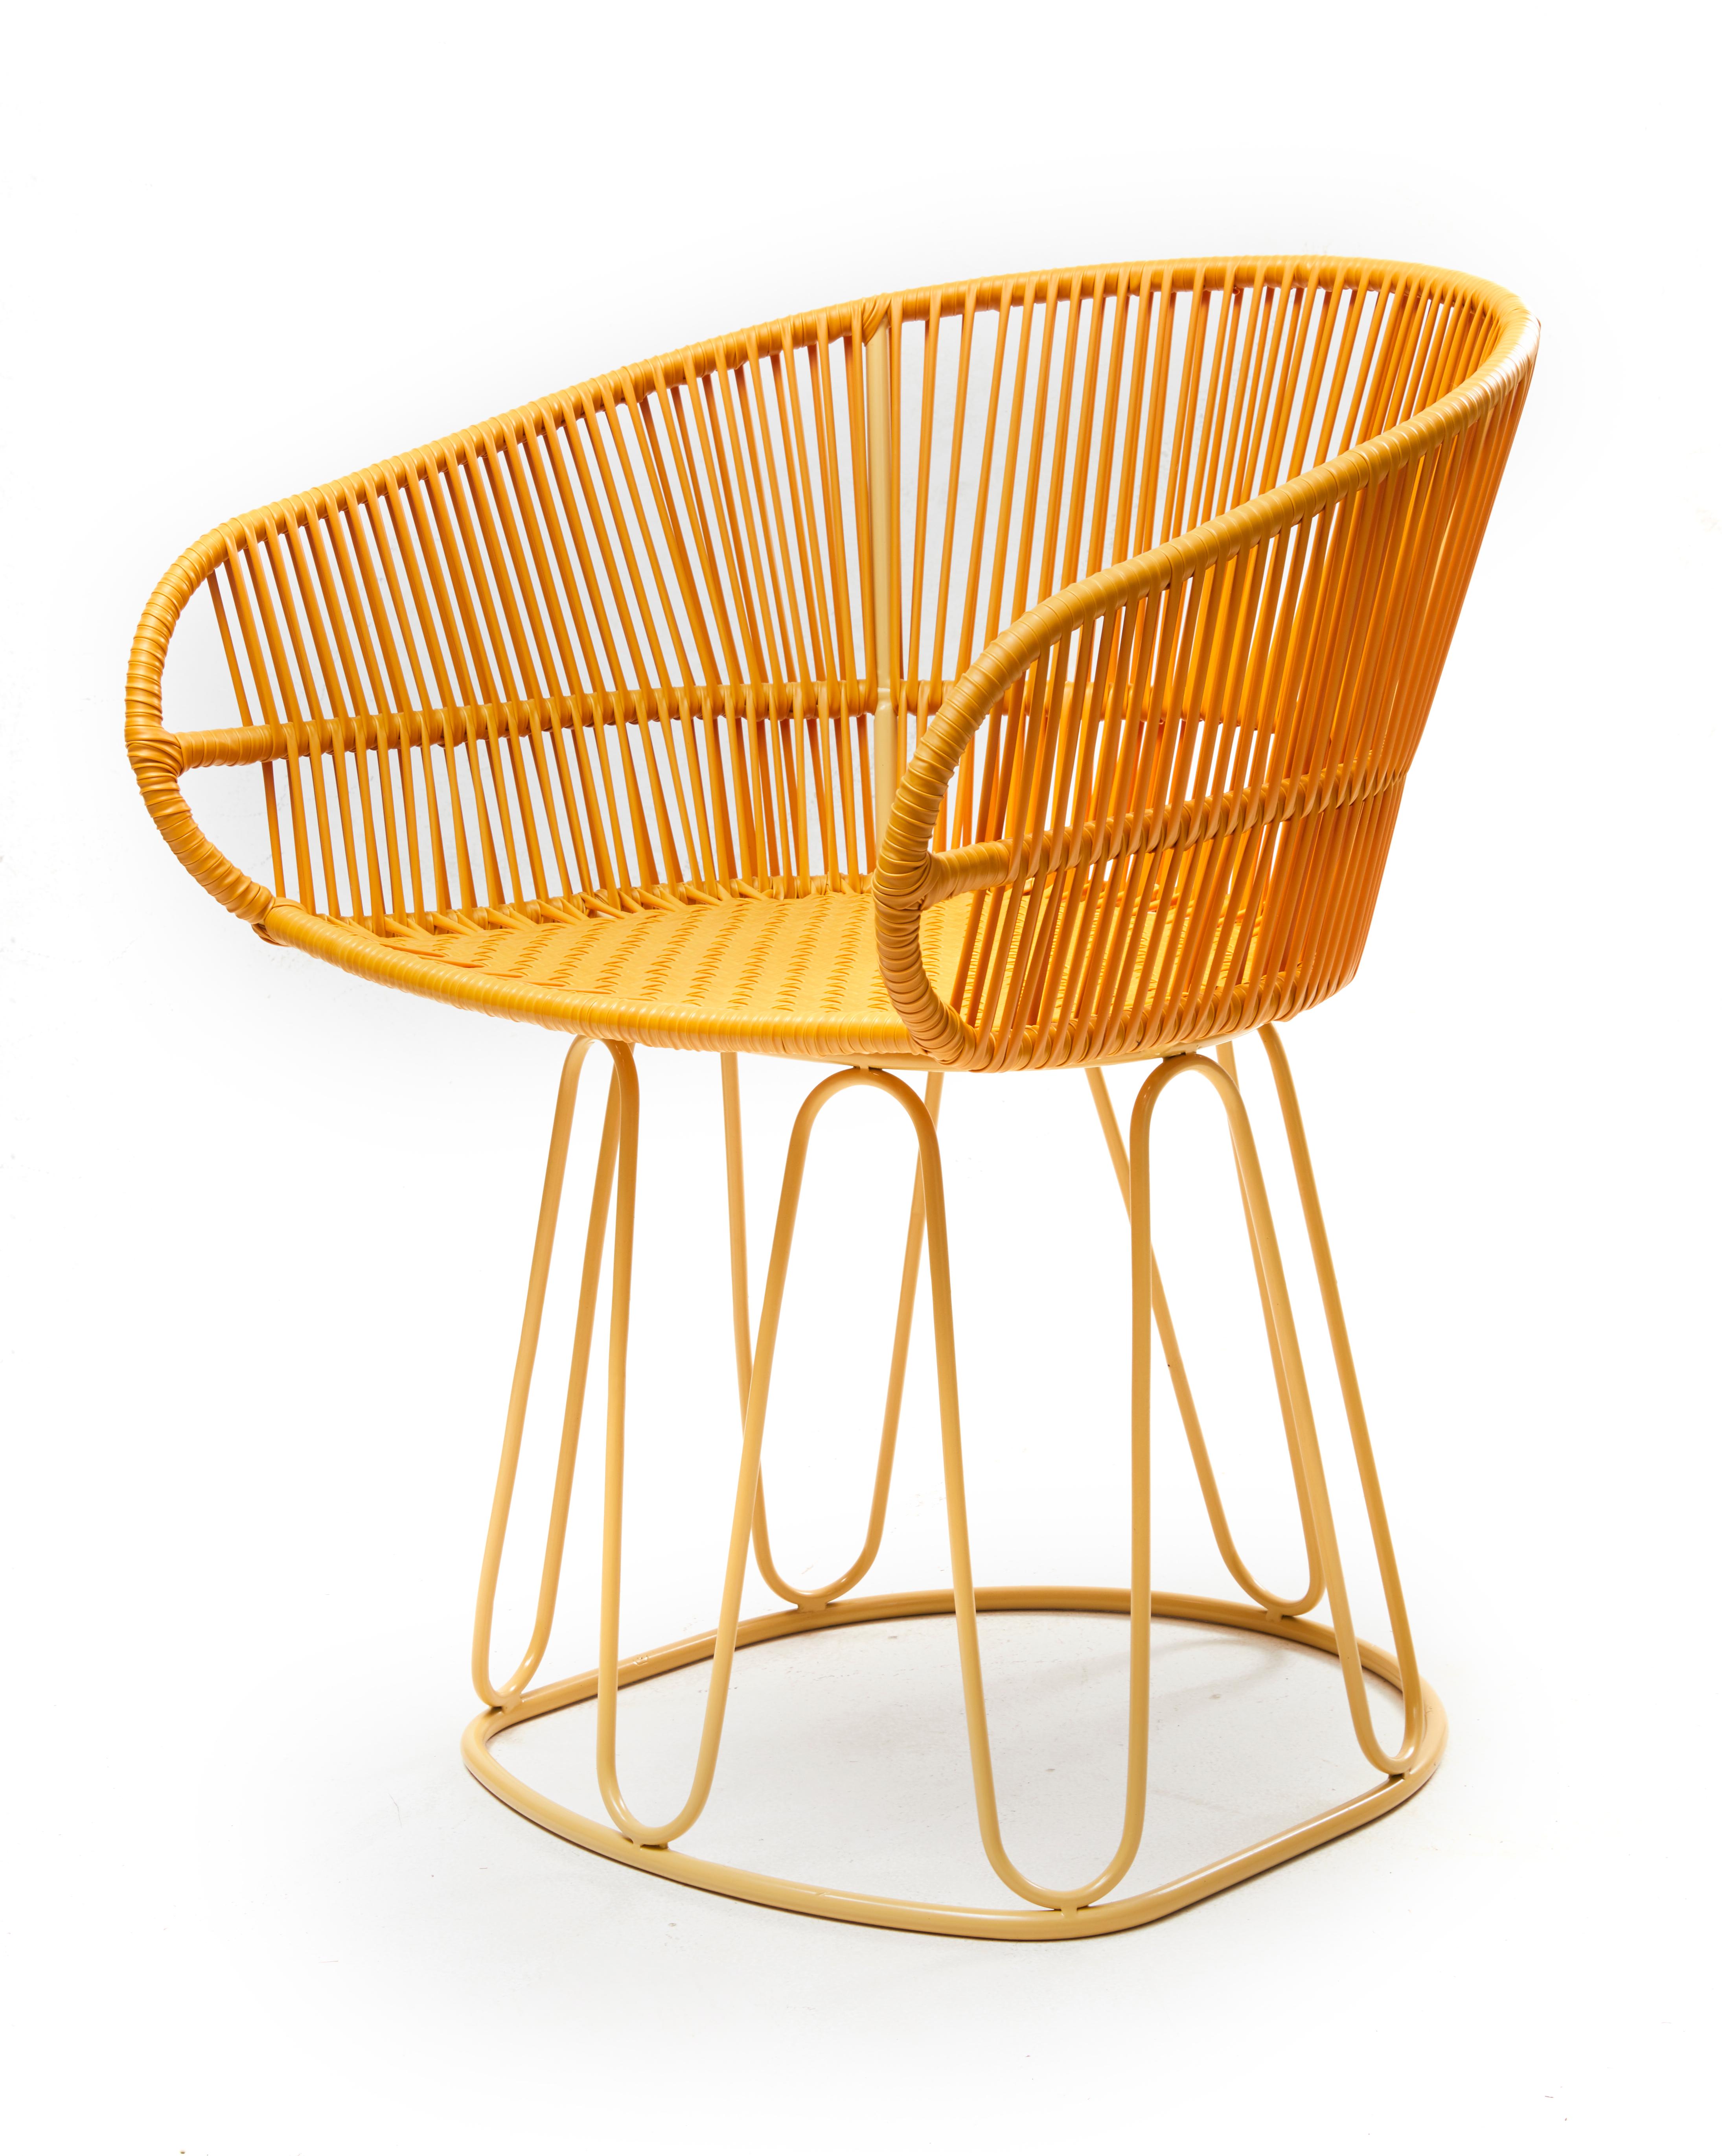 Honey Circo dining chair by Sebastian Herkner
Materials: Galvanized and powder-coated tubular steel. PVC strings.
Technique: Made from recycled plastic. Weaved by local craftspeople in Colombia. 
Dimensions: W 61.5 x D 56.5 x H 77.5 cm